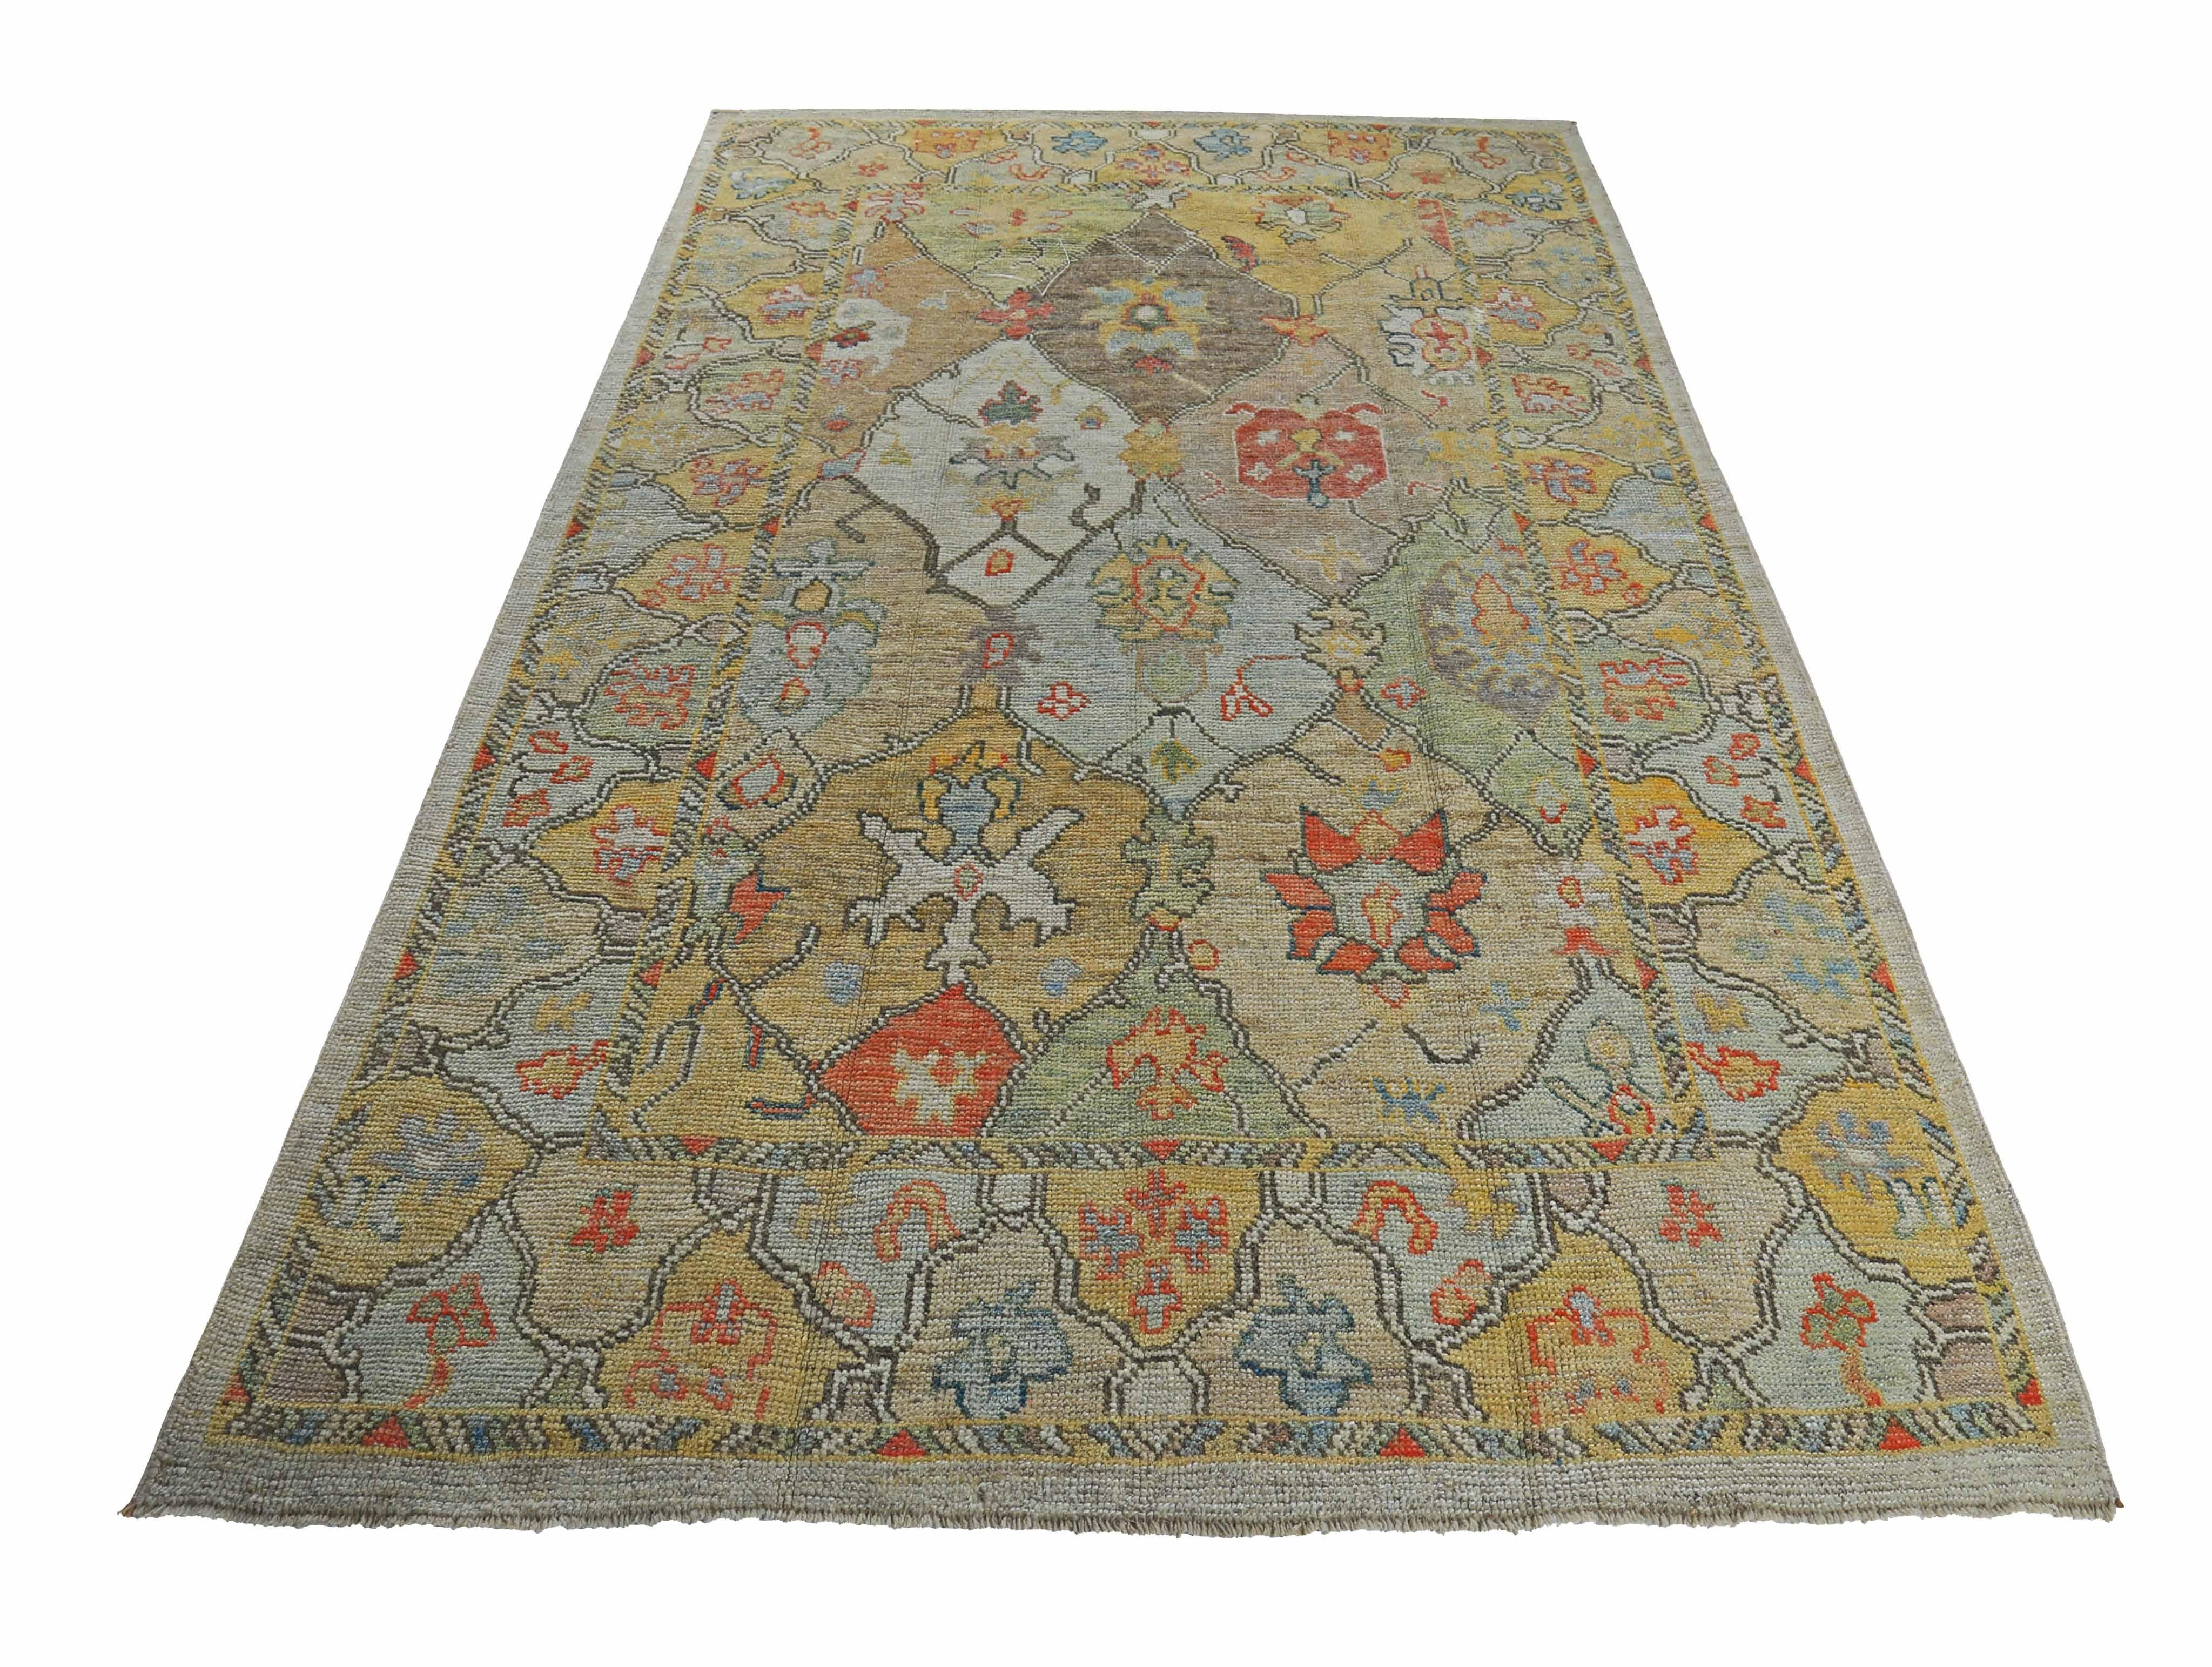 New Turkish rug made of handwoven sheep’s wool of the finest quality. It’s colored with organic vegetable dyes that are certified safe for humans and pets alike. It features orange and gold floral details on an ivory field. Flower patterns are